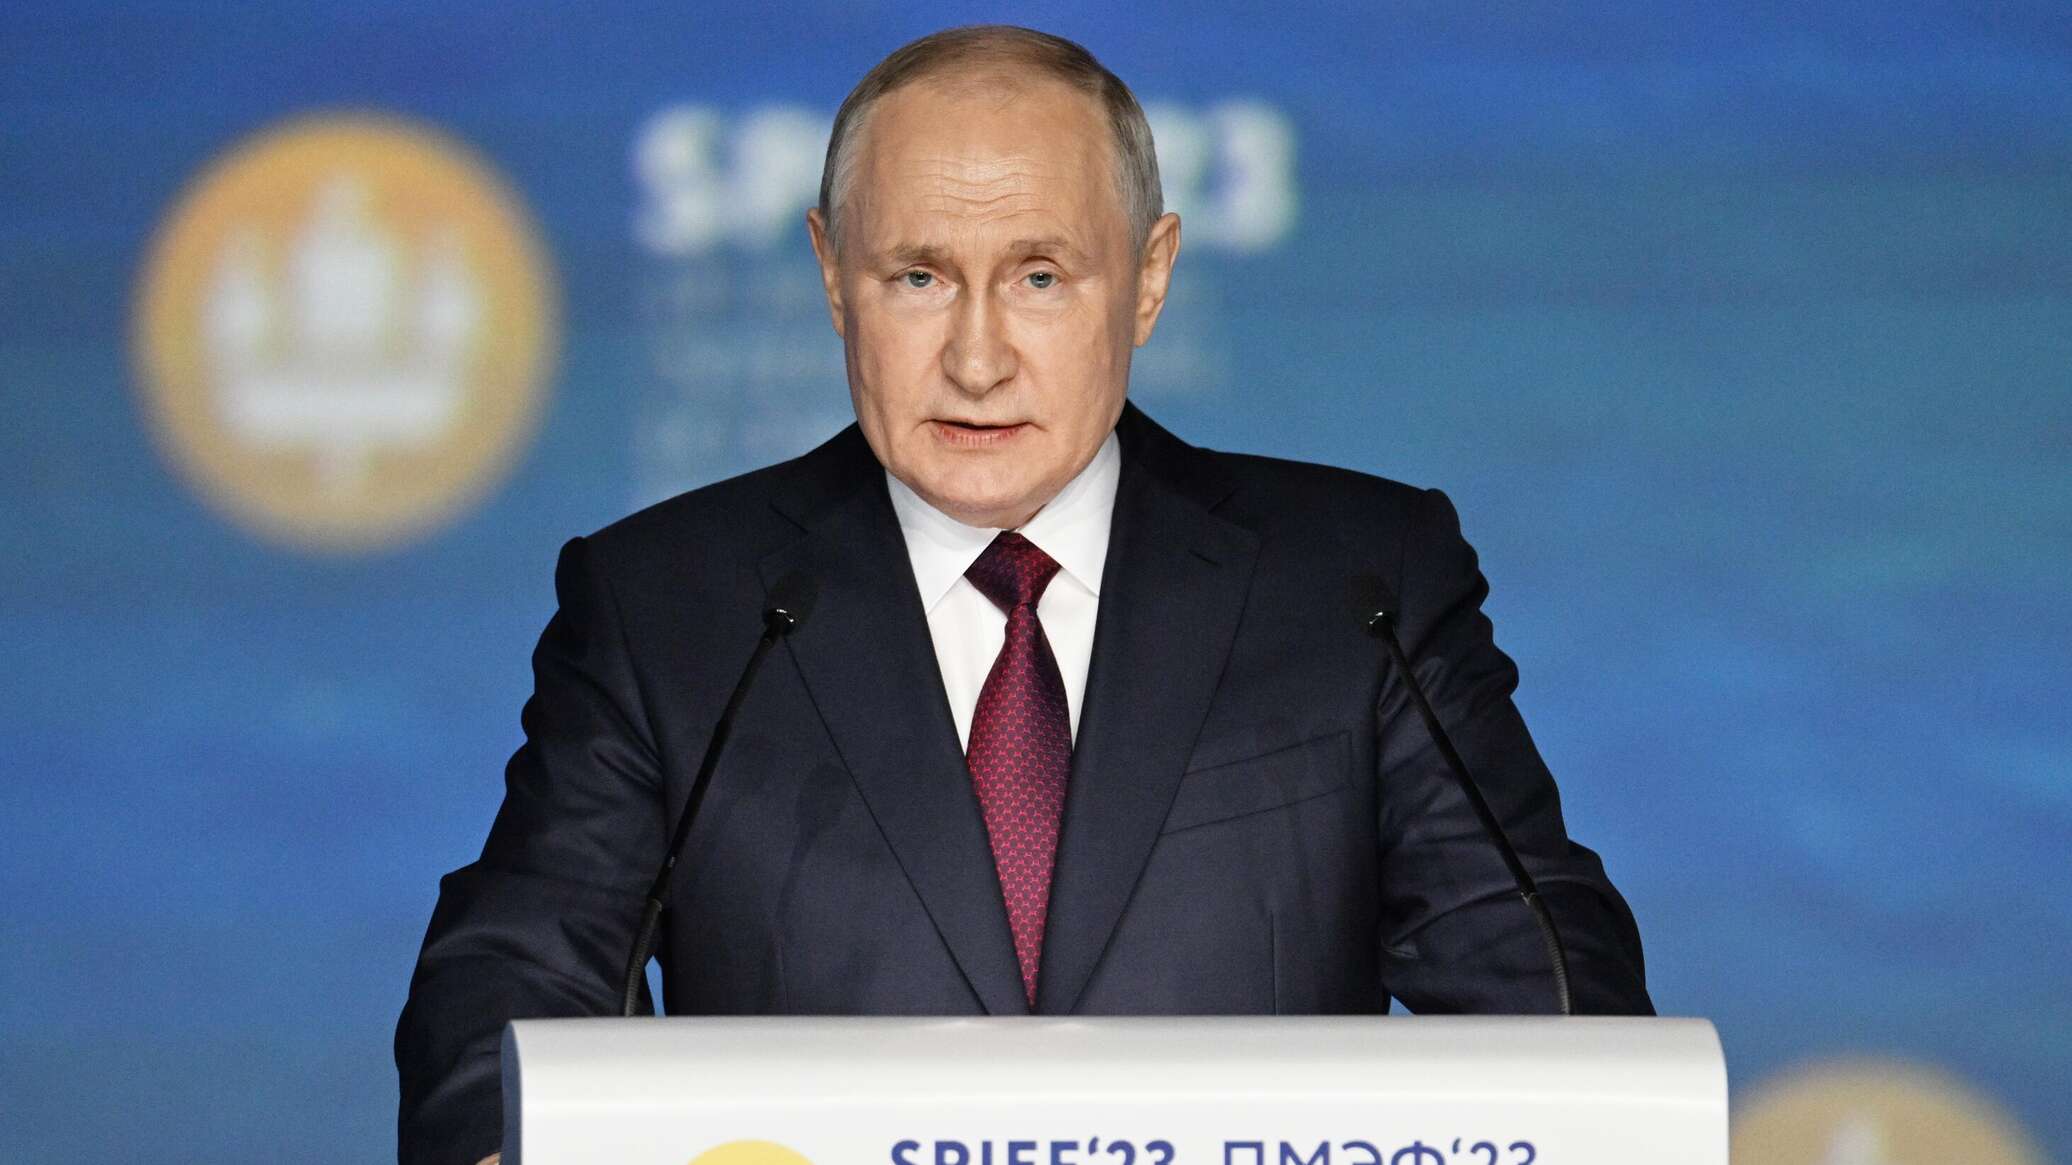 Putin: Russia has more nuclear weapons than NATO countries and they want us to reduce them, but this will not happen